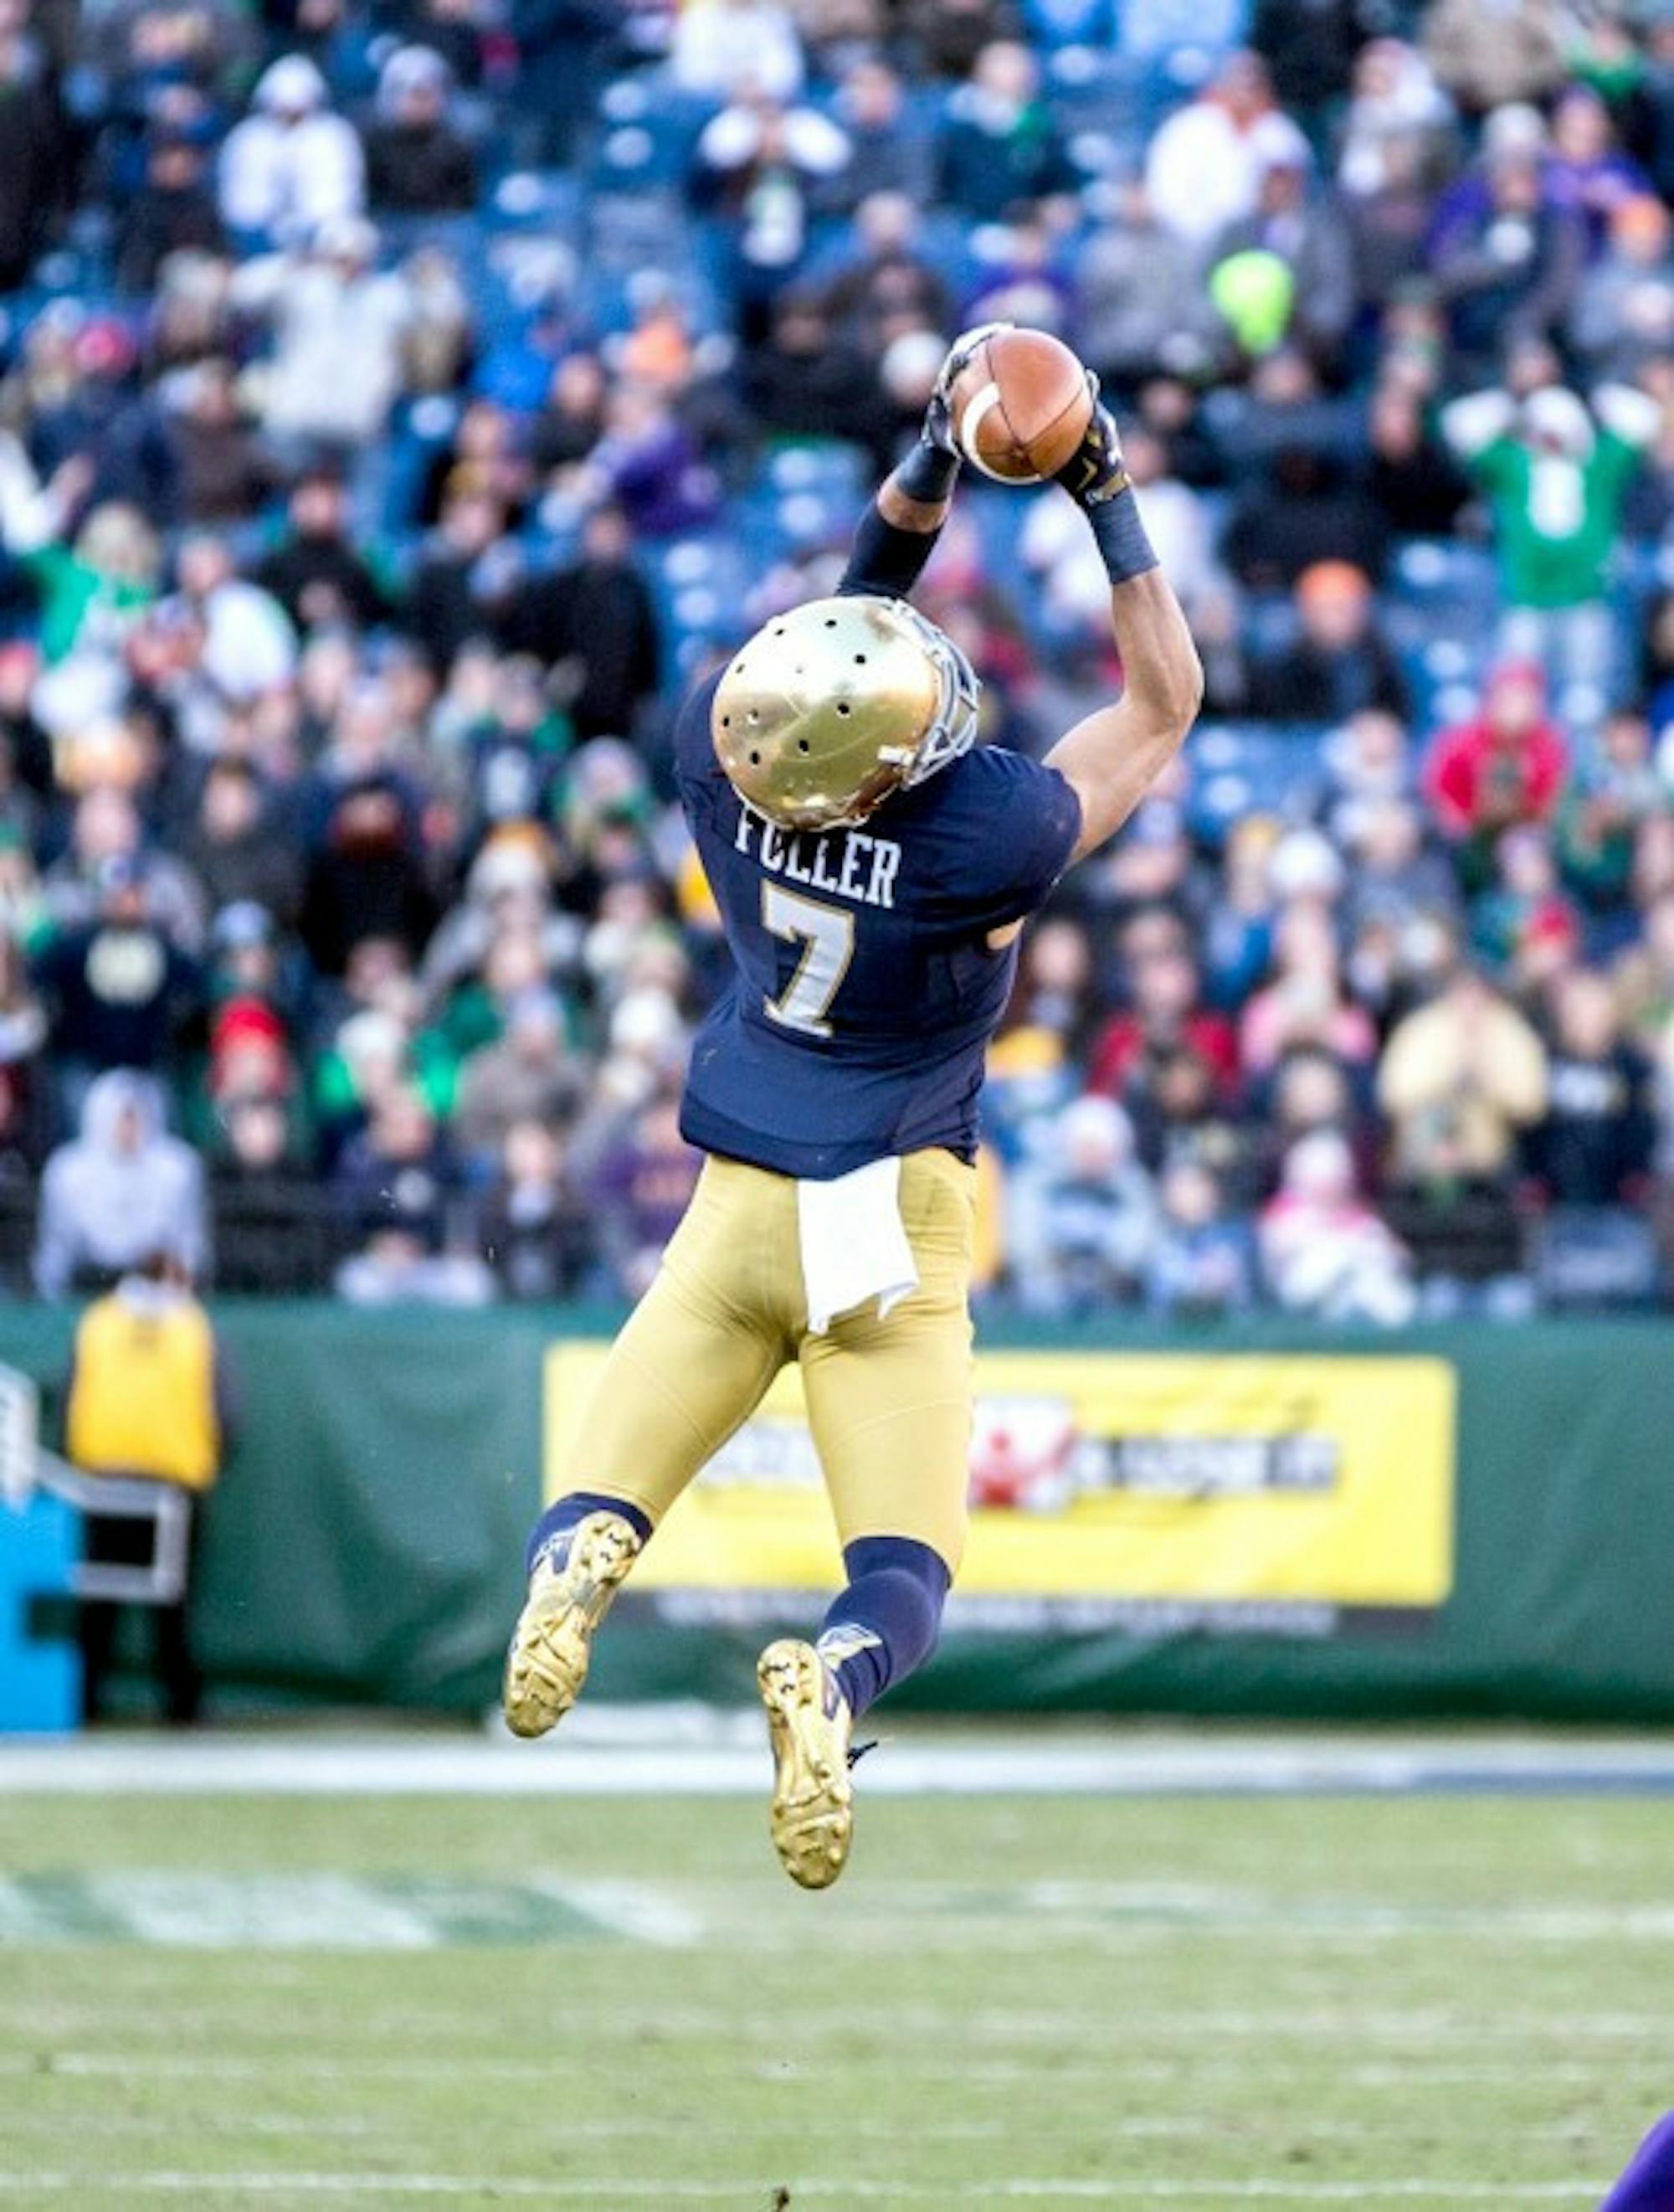 Irish sophomore receiver Will Fuller goes airborne to snag a pass during Notre Dame’s 31-28 victory over LSU in the Franklin American Mortgage Music City Bowl on Dec. 30. Fuller grabbed five passes and a score.